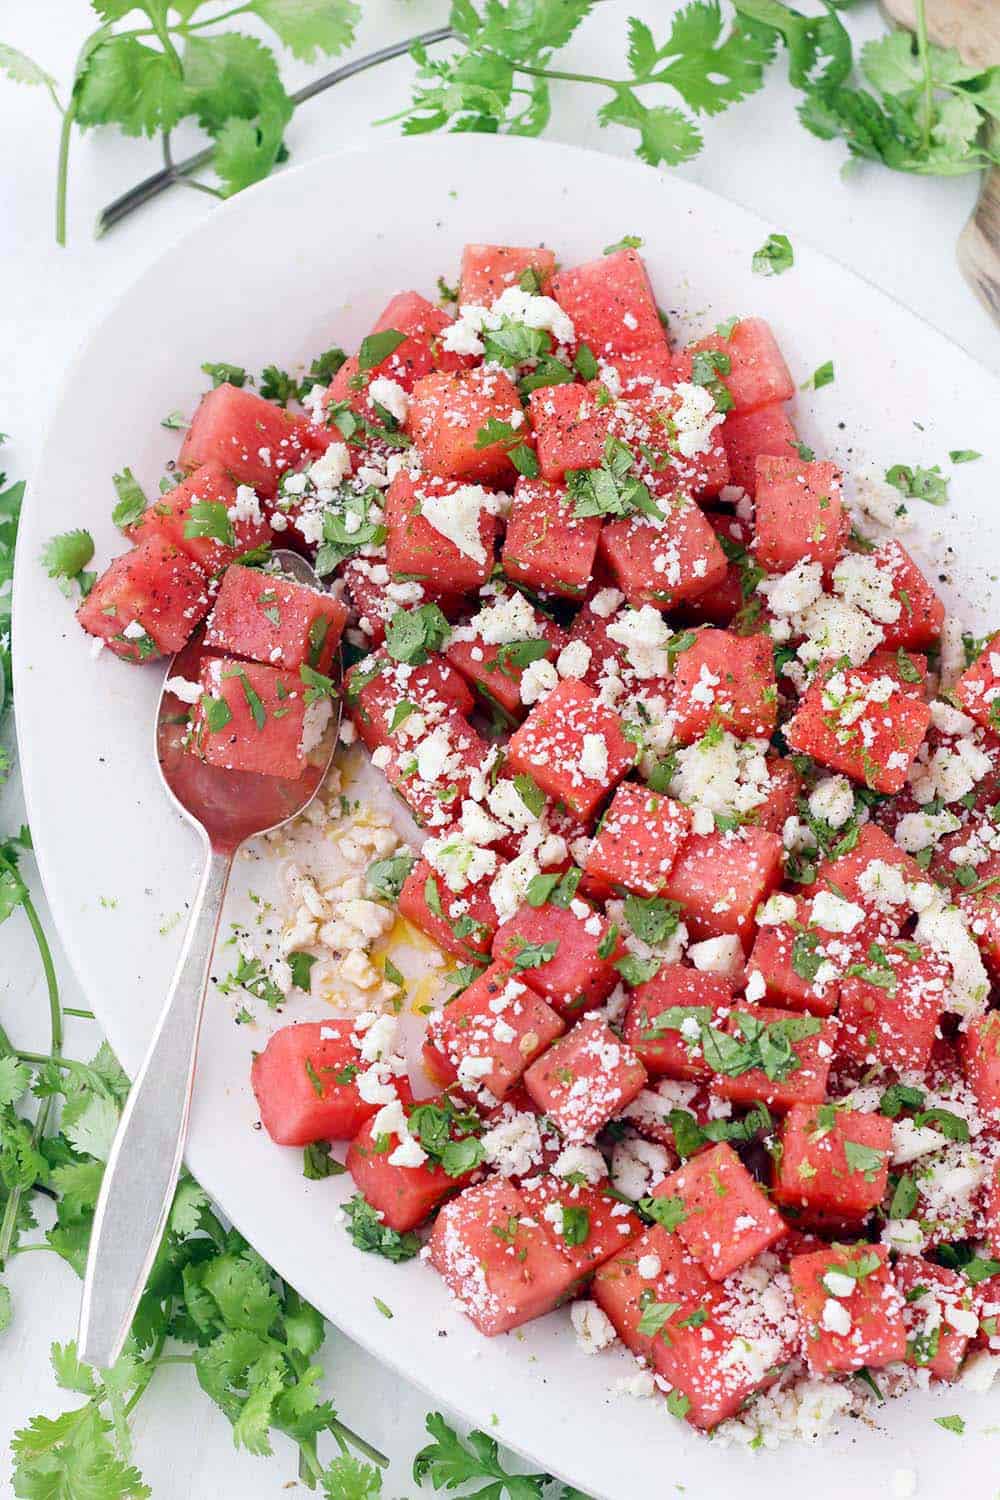 This refreshing watermelon salad with queso fresco, lime, and cilantro is the perfect balance of sweet and salty! It's easy to make this vegetarian side dish in advance and perfect for your summer festivities.